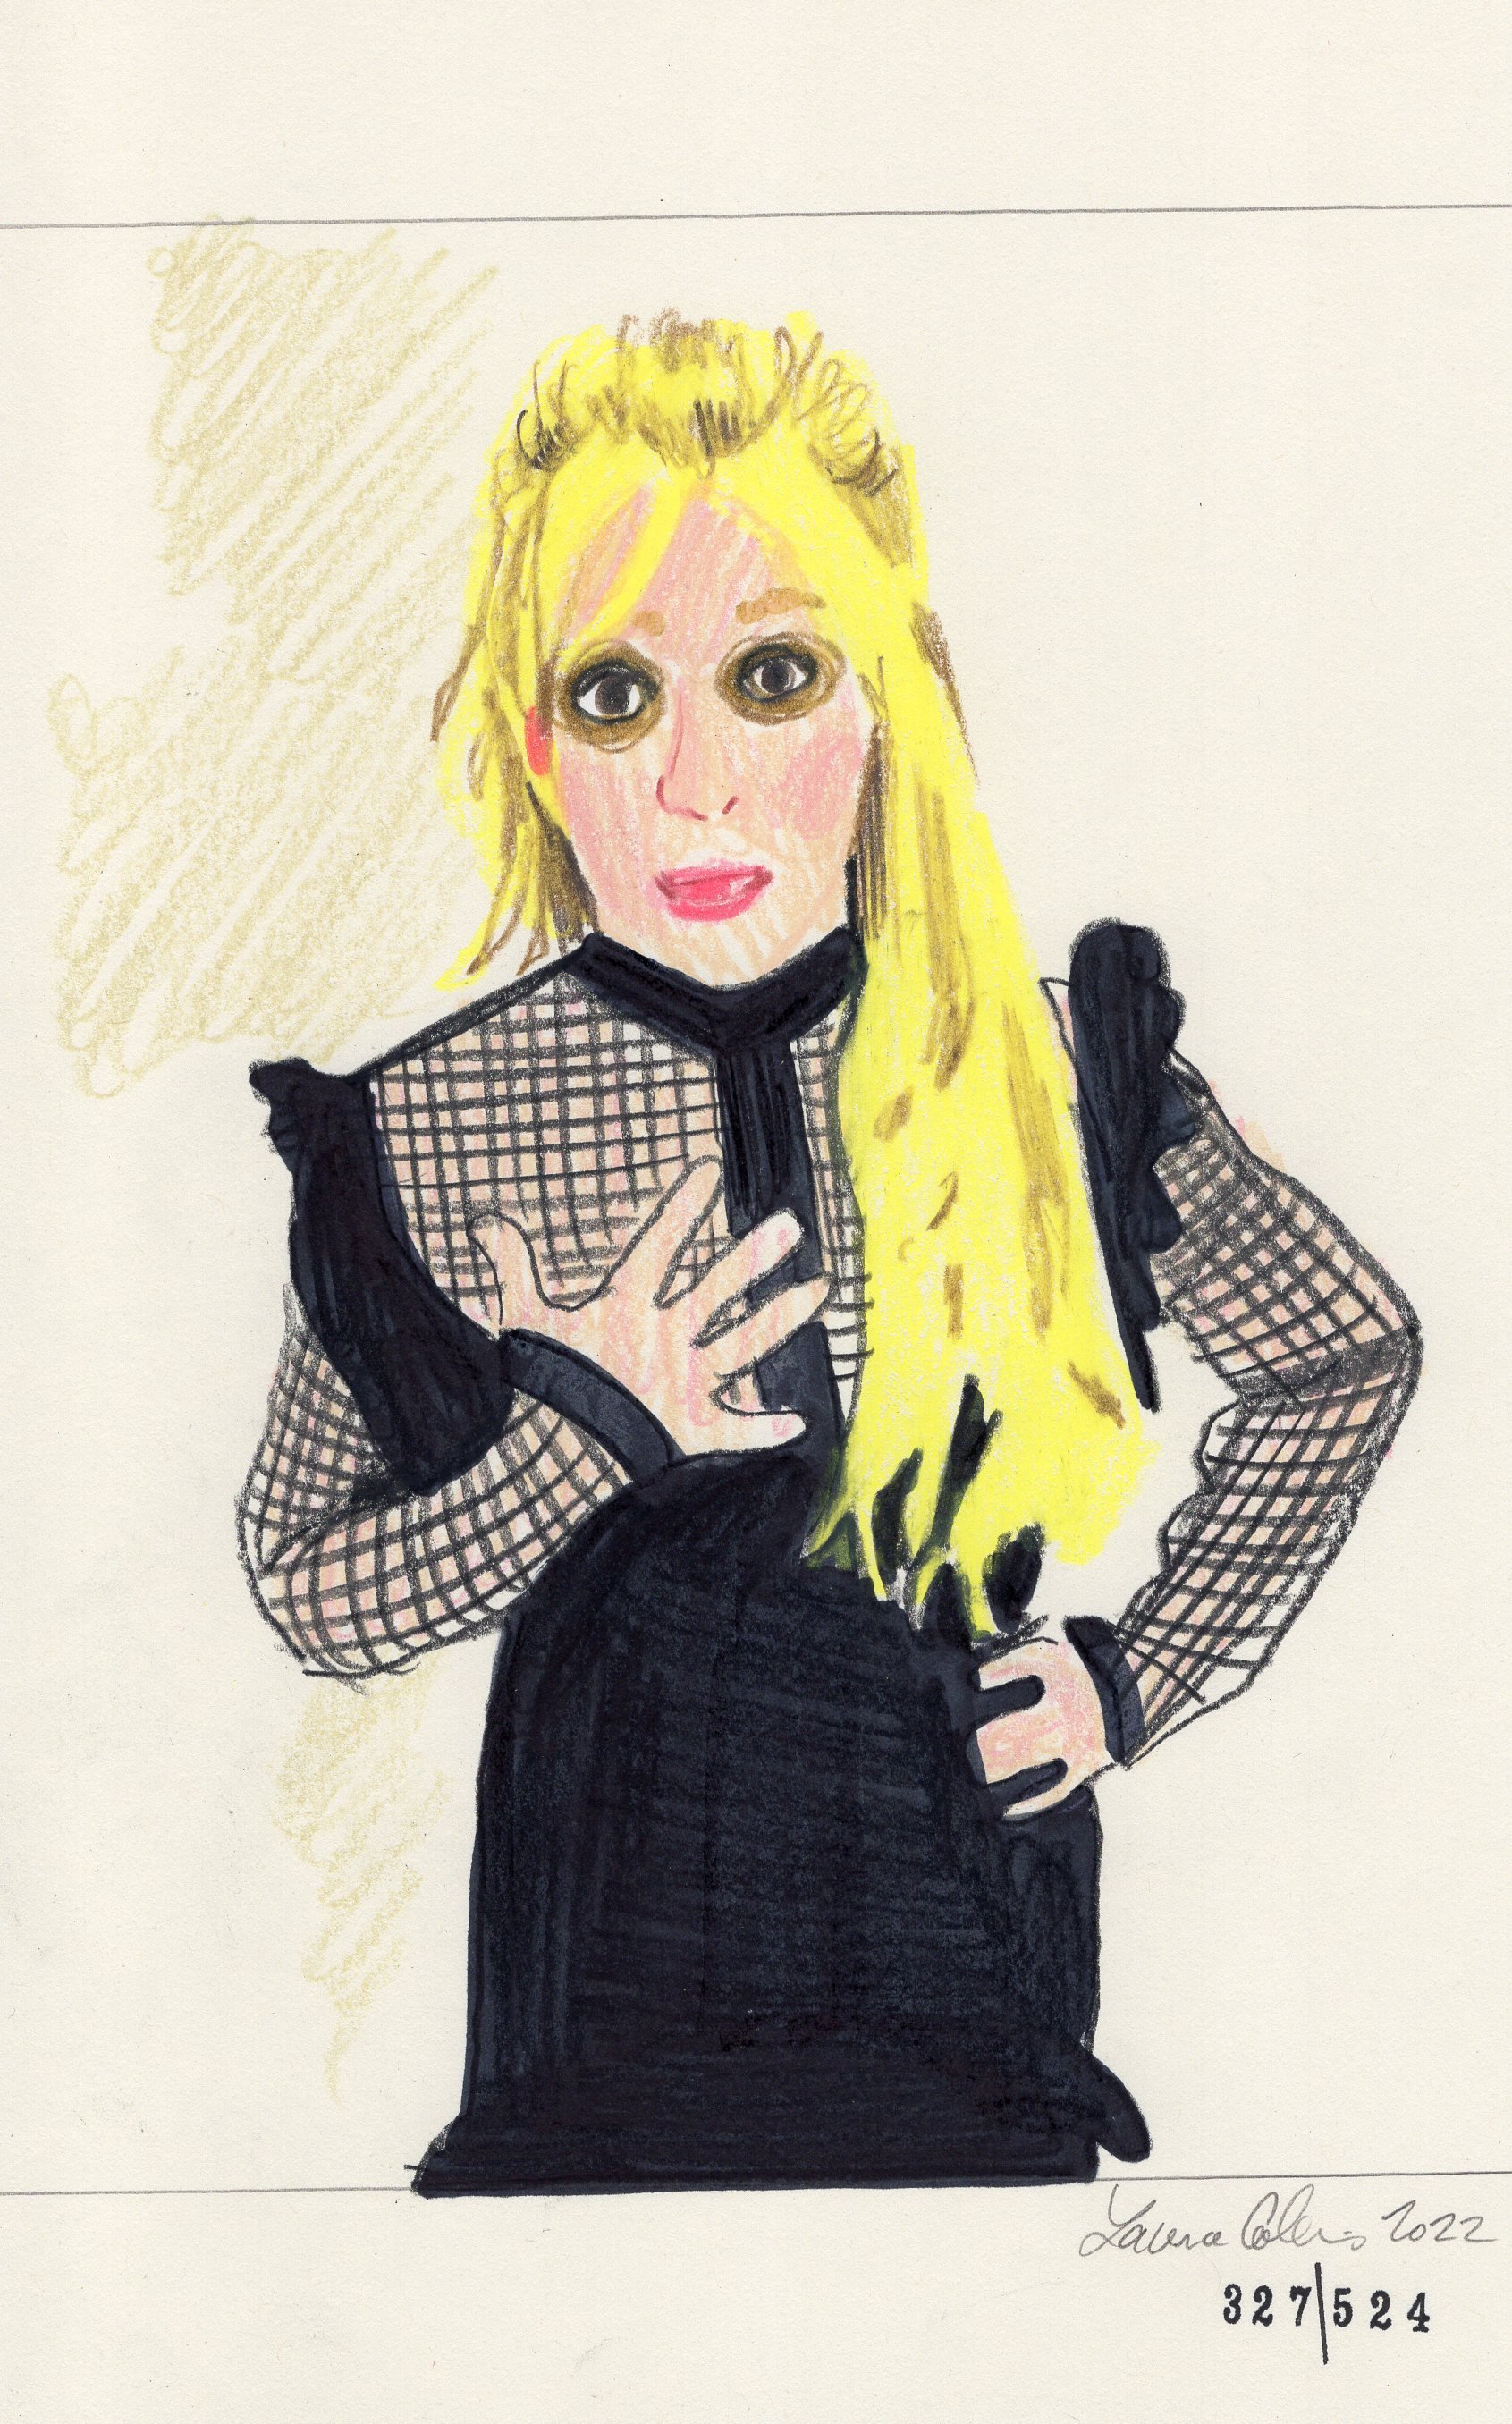 Laura Collins Britney Spears Animation 6x9in mixed media 2022 no327.jpg